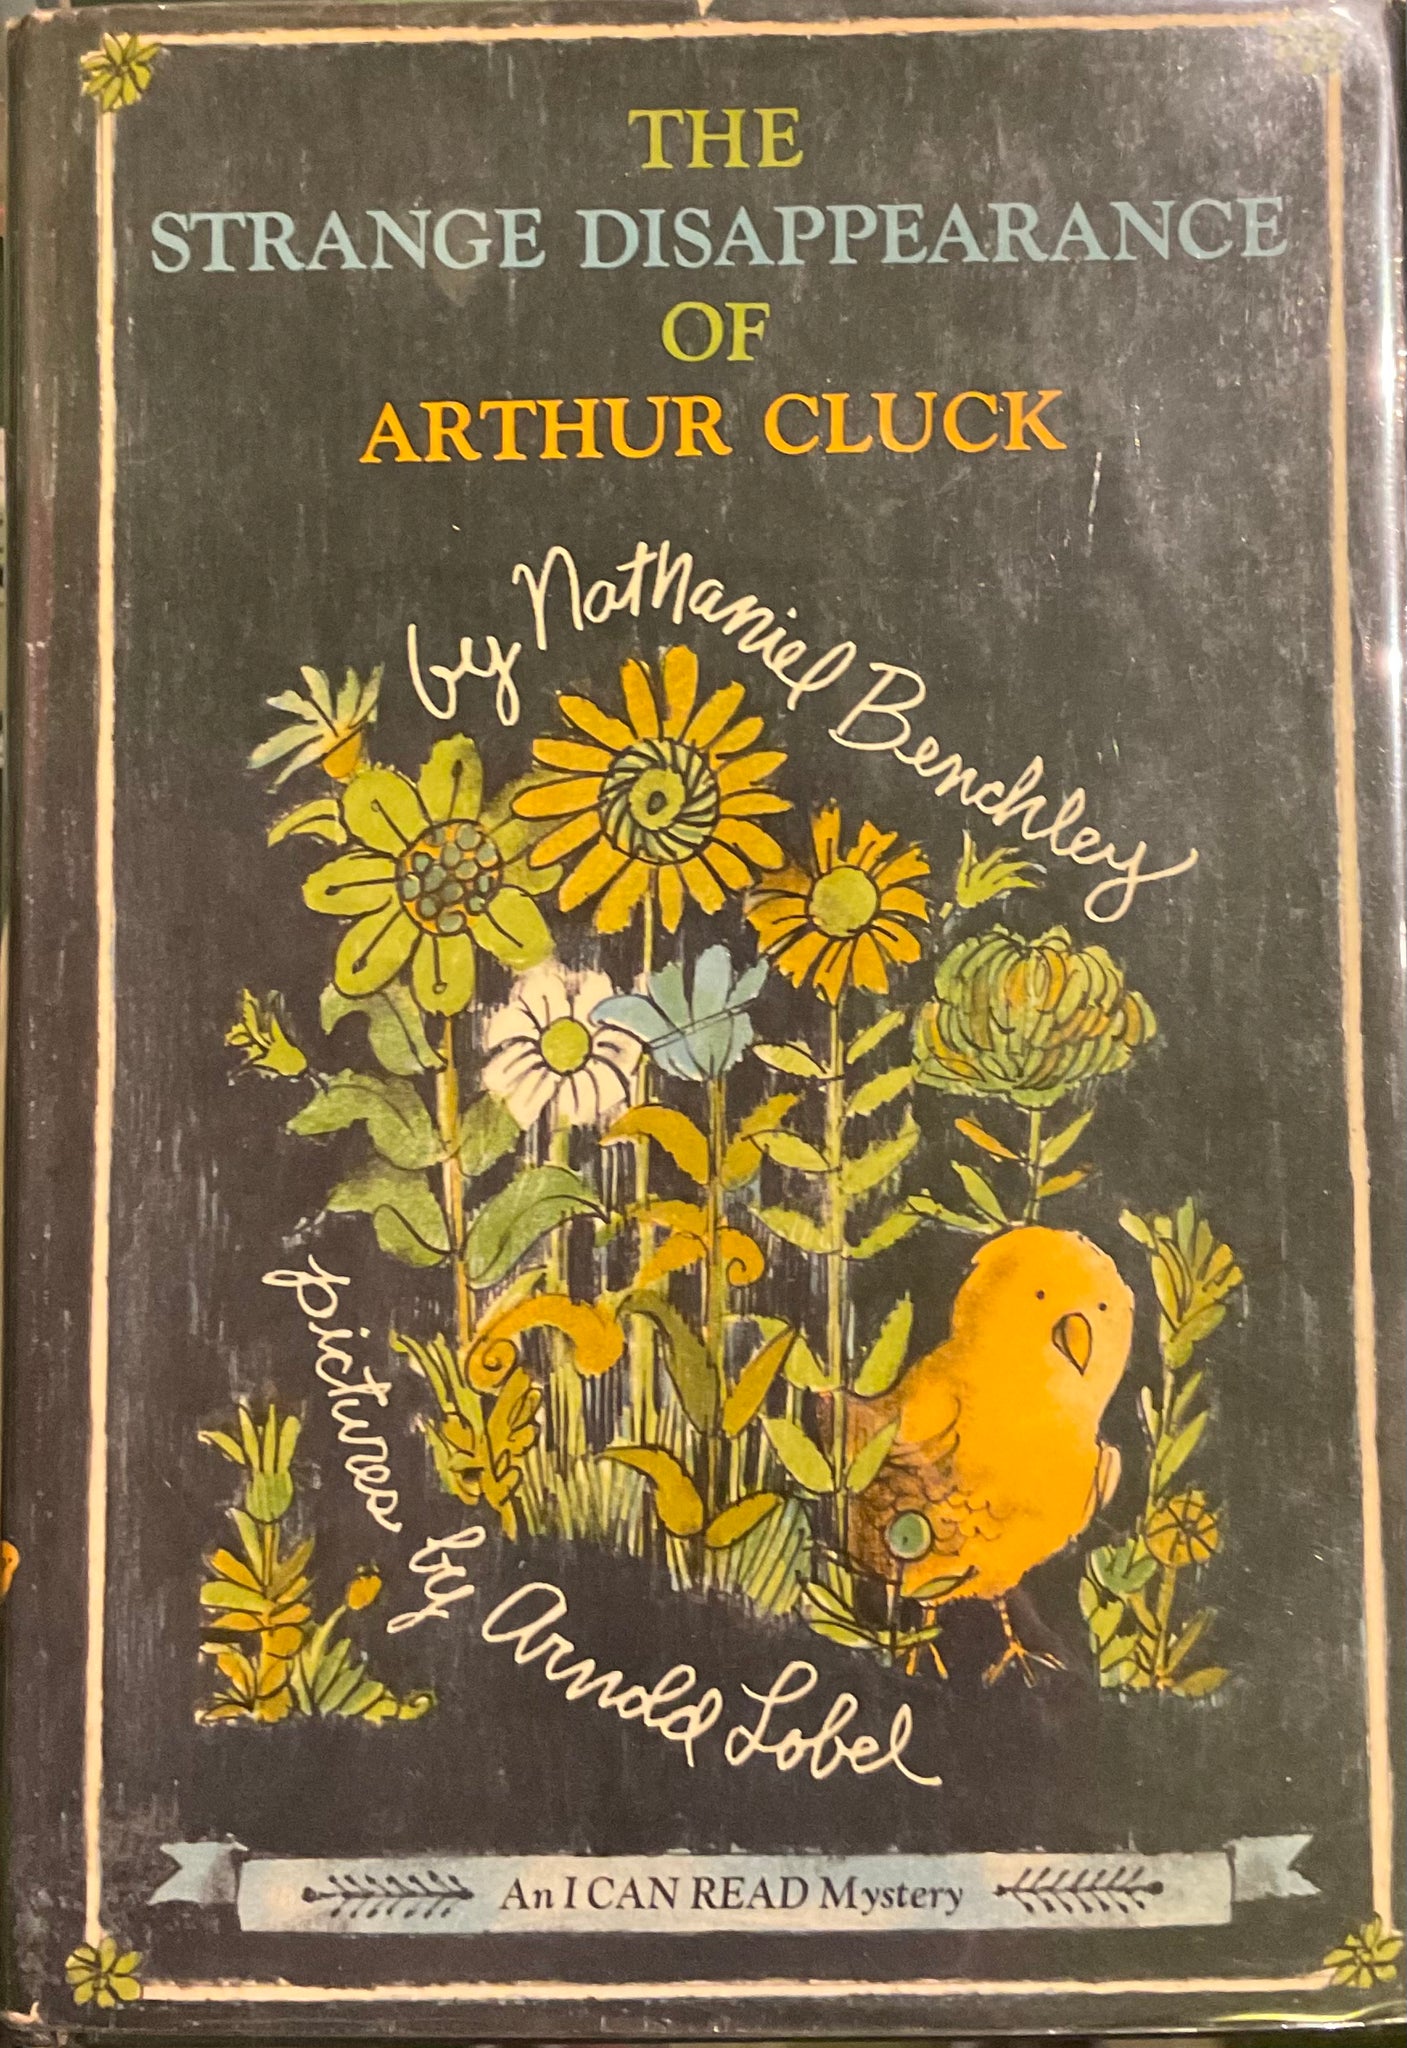 The Strange Disappearance of Arthur Cluck, Nathaniel Benchley